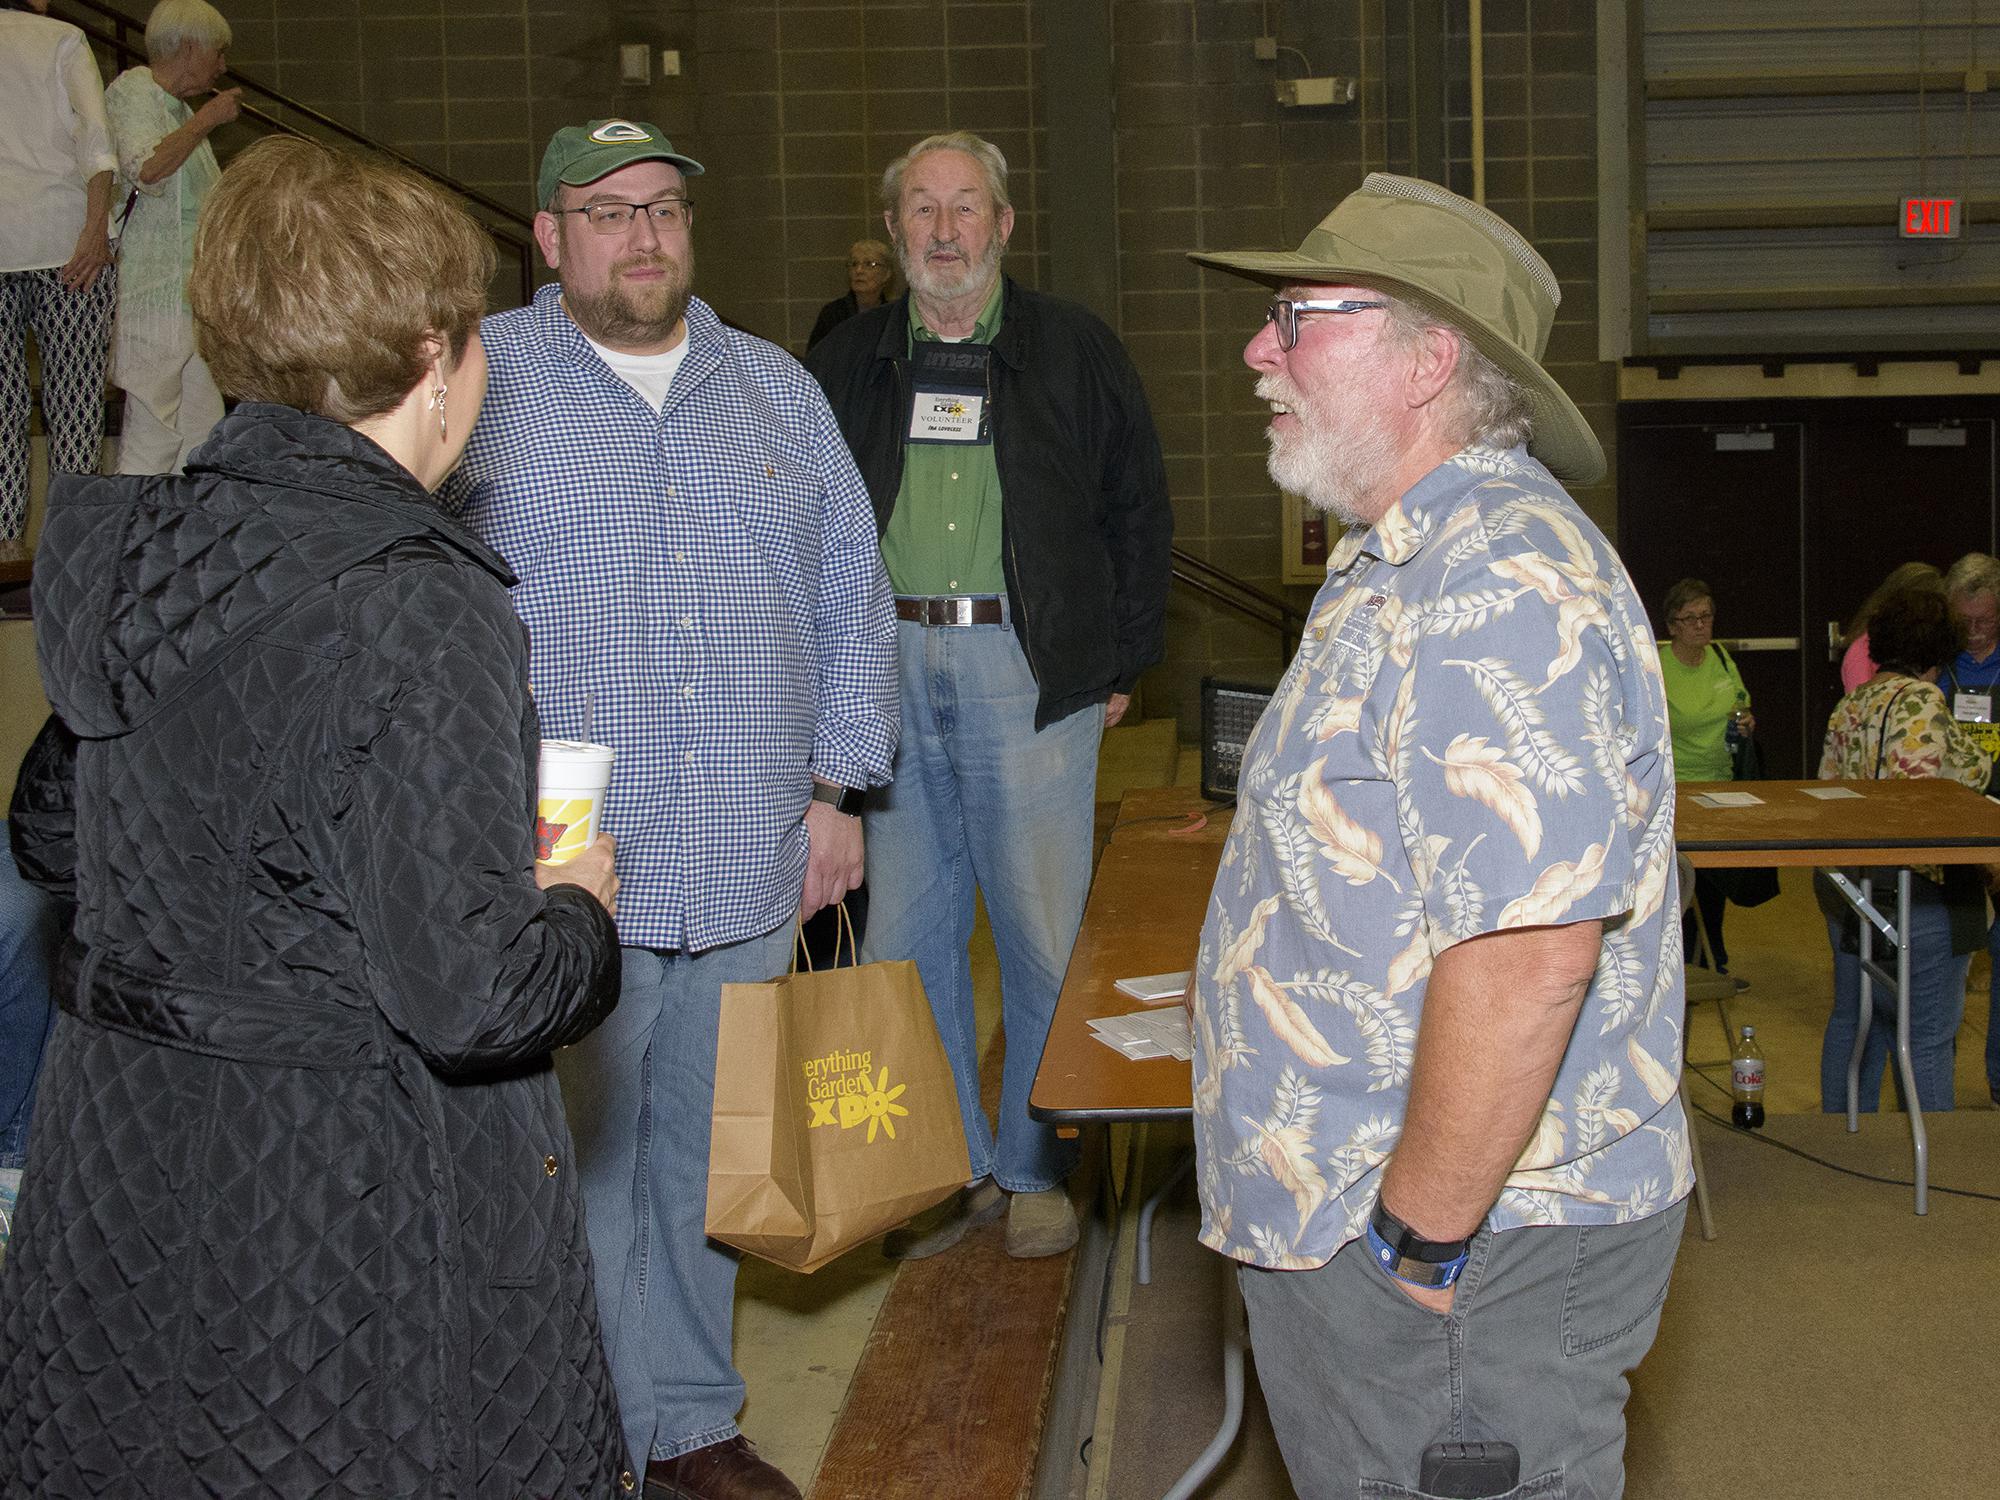 A man in a gardening hat stands and talks to three adults, with several others milling about in the background.